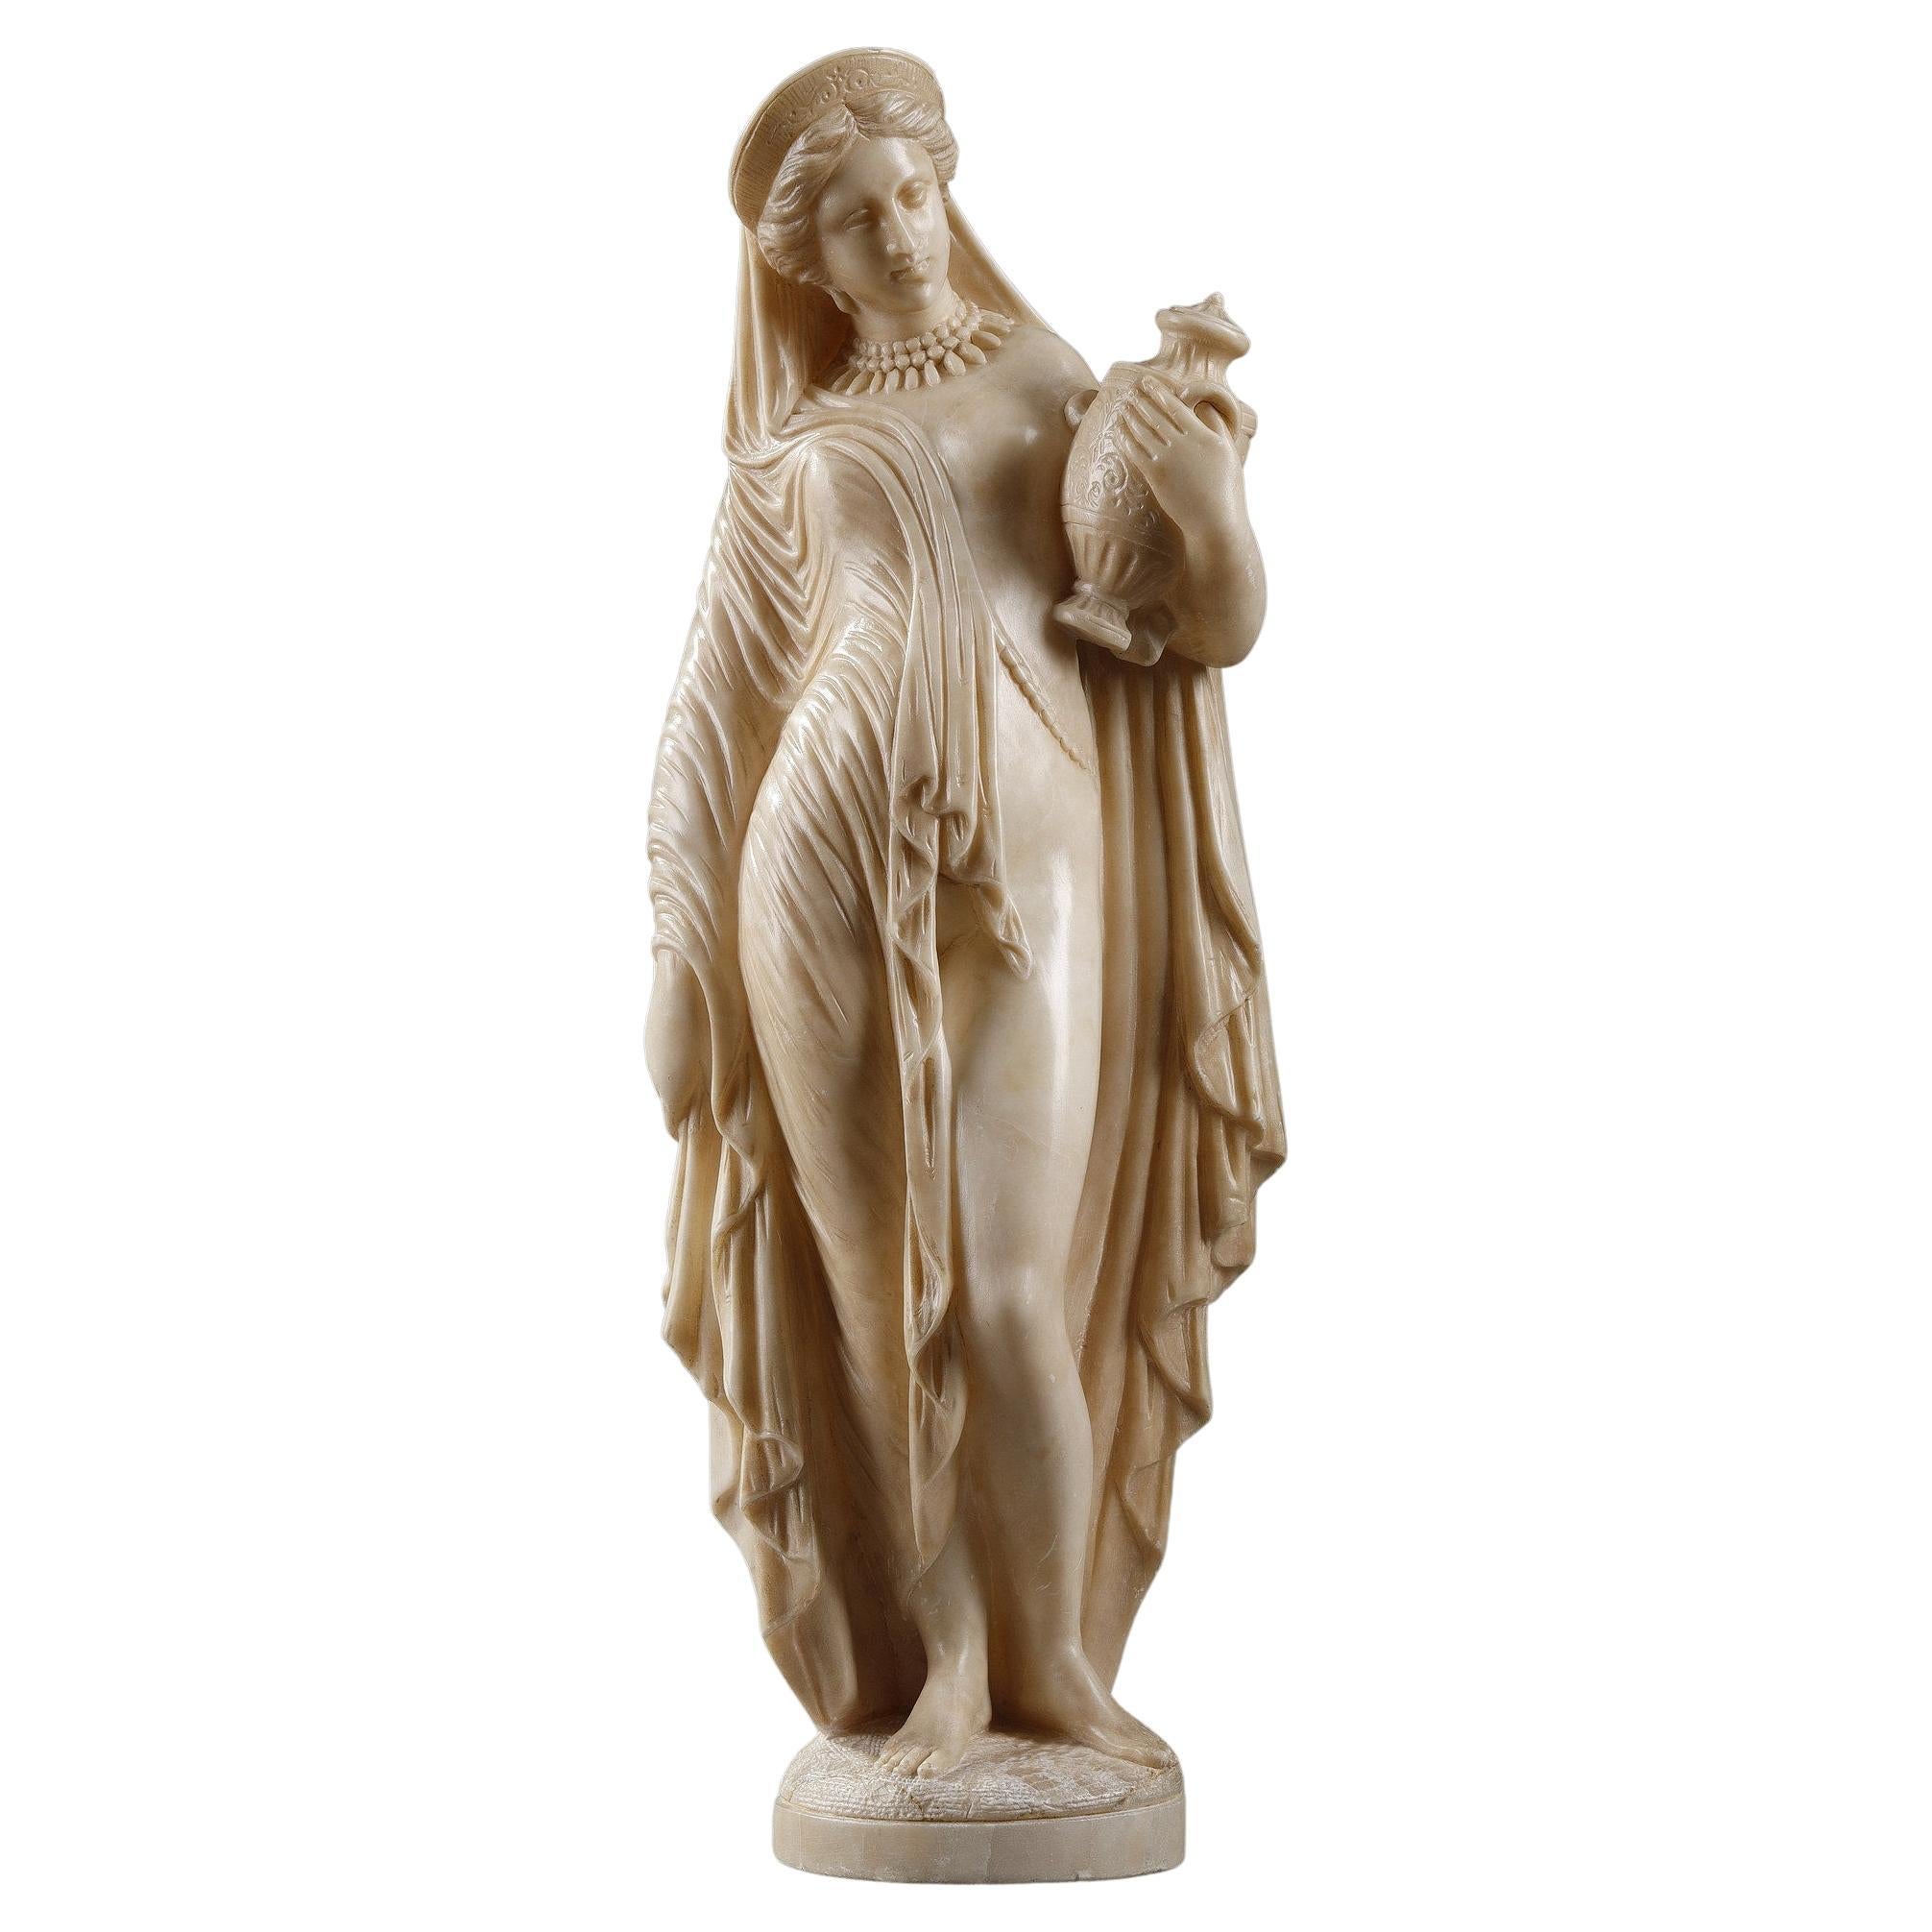 Statuette in Alabaster "Pandora" After James Pradier, Late 19th Century